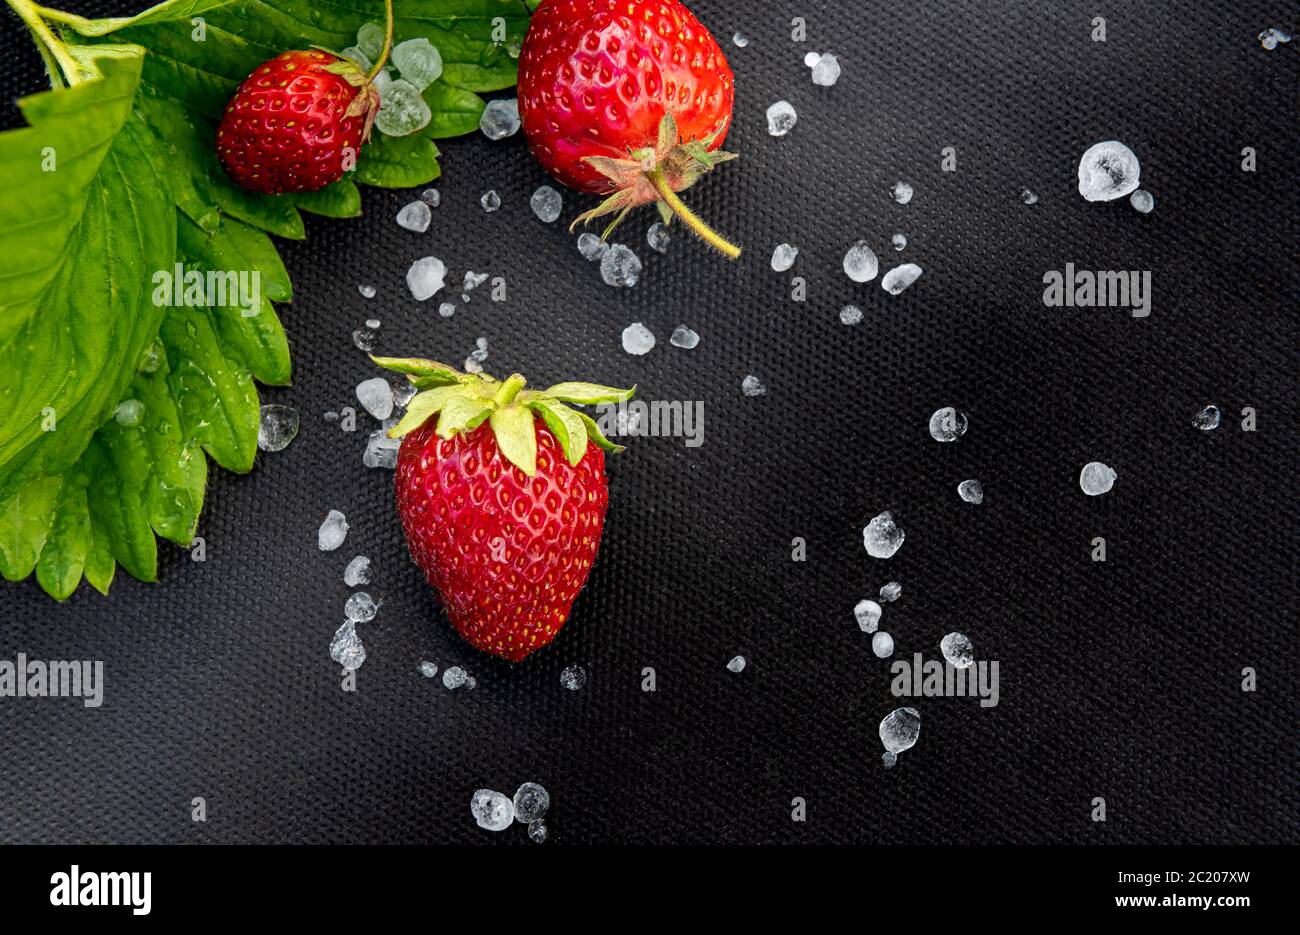 Organic red strawberries with few white hailstones and leaf on black textile material used for cultivating this berry in garden. Horizontal background Stock Photo